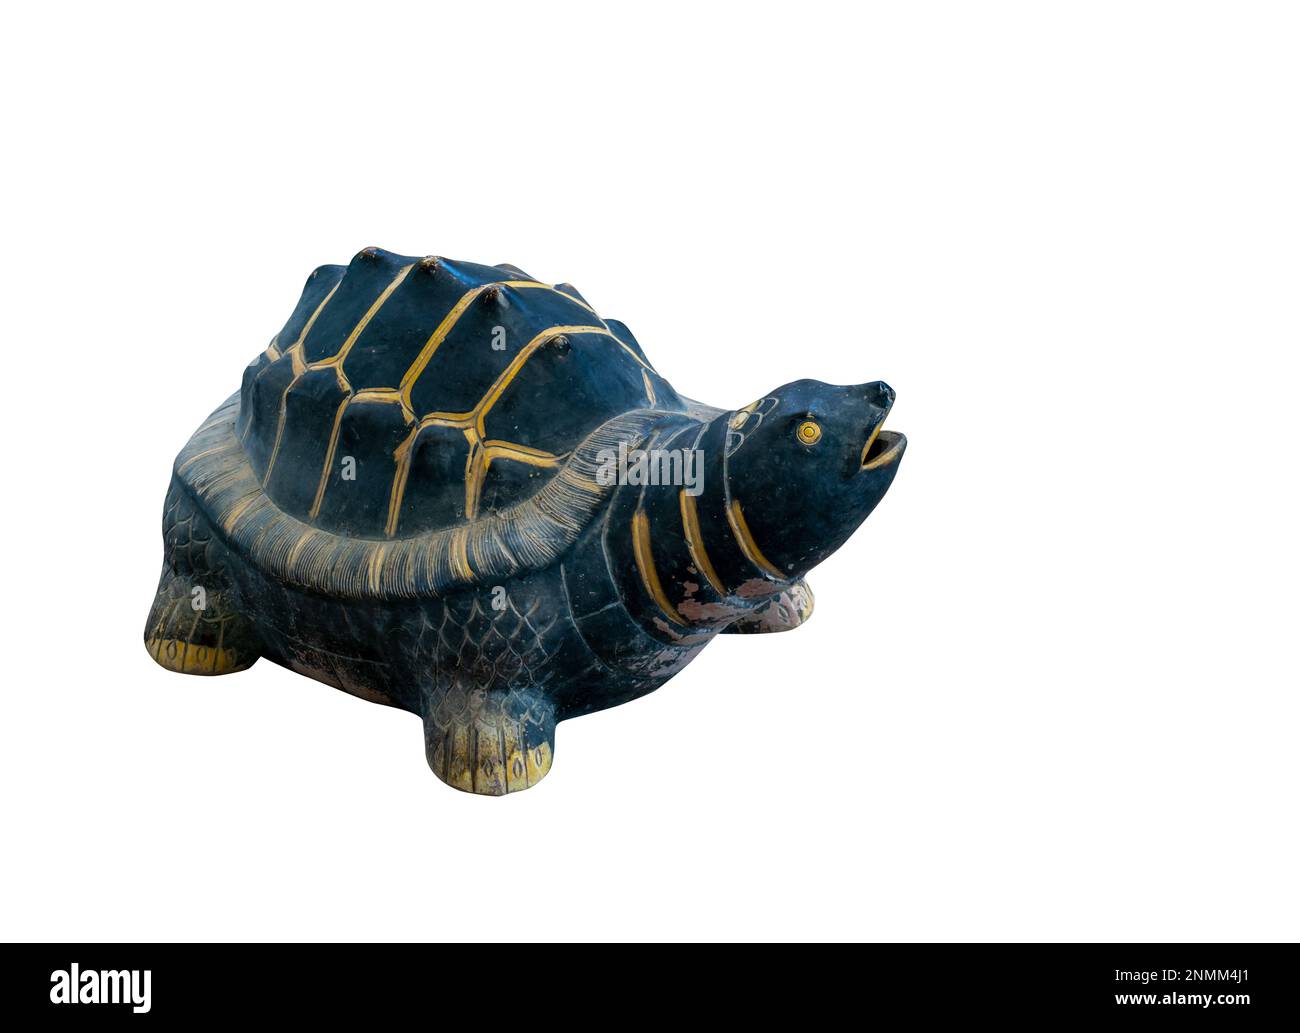 A cute turtle made of clay for garden decoration, old condition from weather, painted with dark green color and gold for the line. Isolated image on w Stock Photo